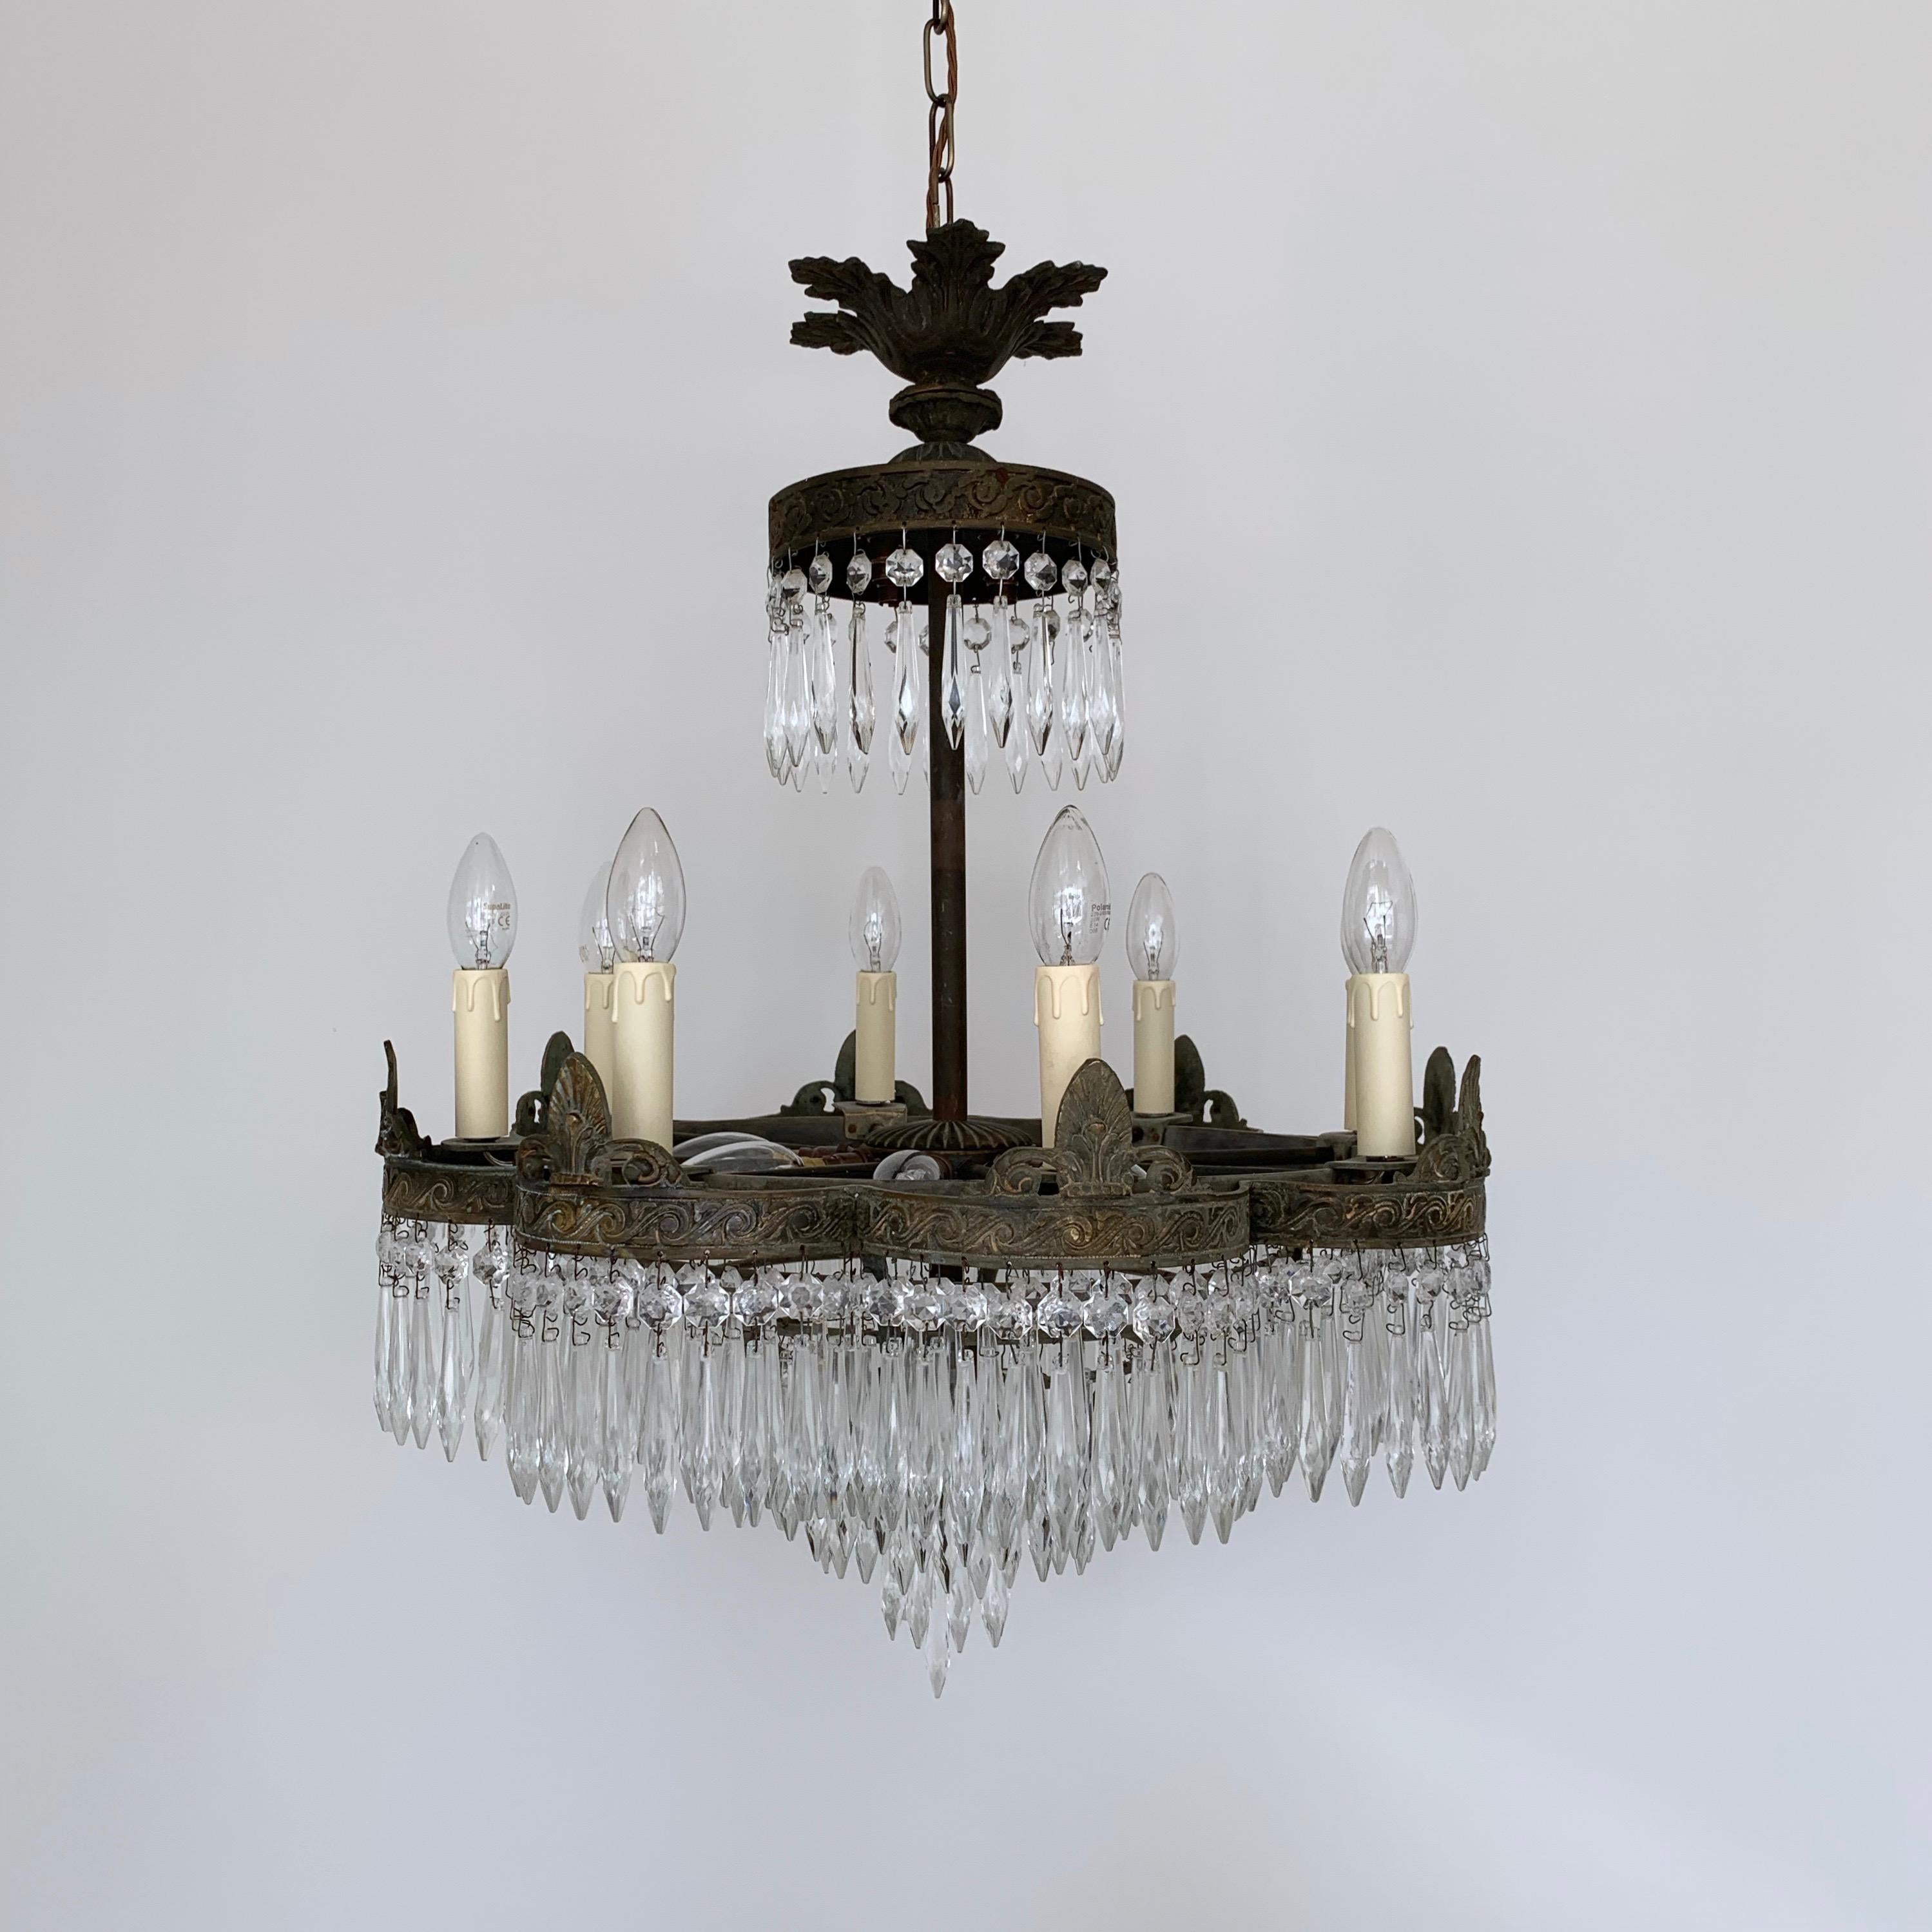 Early 1900s French Waterfall Petal Frame Chandelier with Glass Icicle Drops For Sale 1